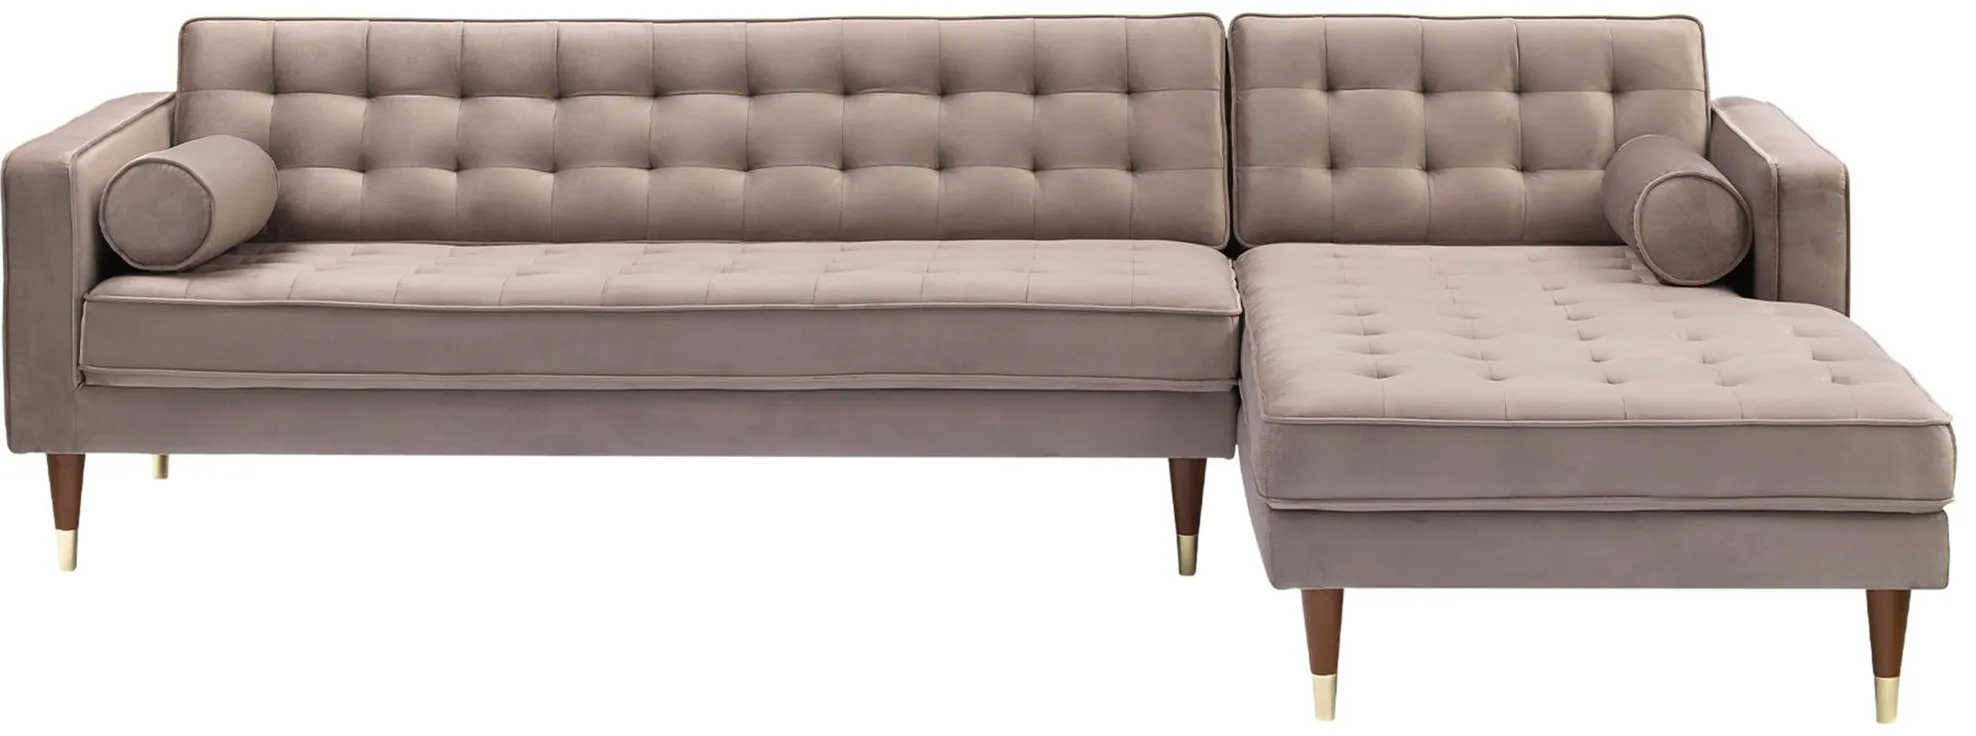 Somerset 2-pc. Sectional Sofa in Taupe by Armen Living